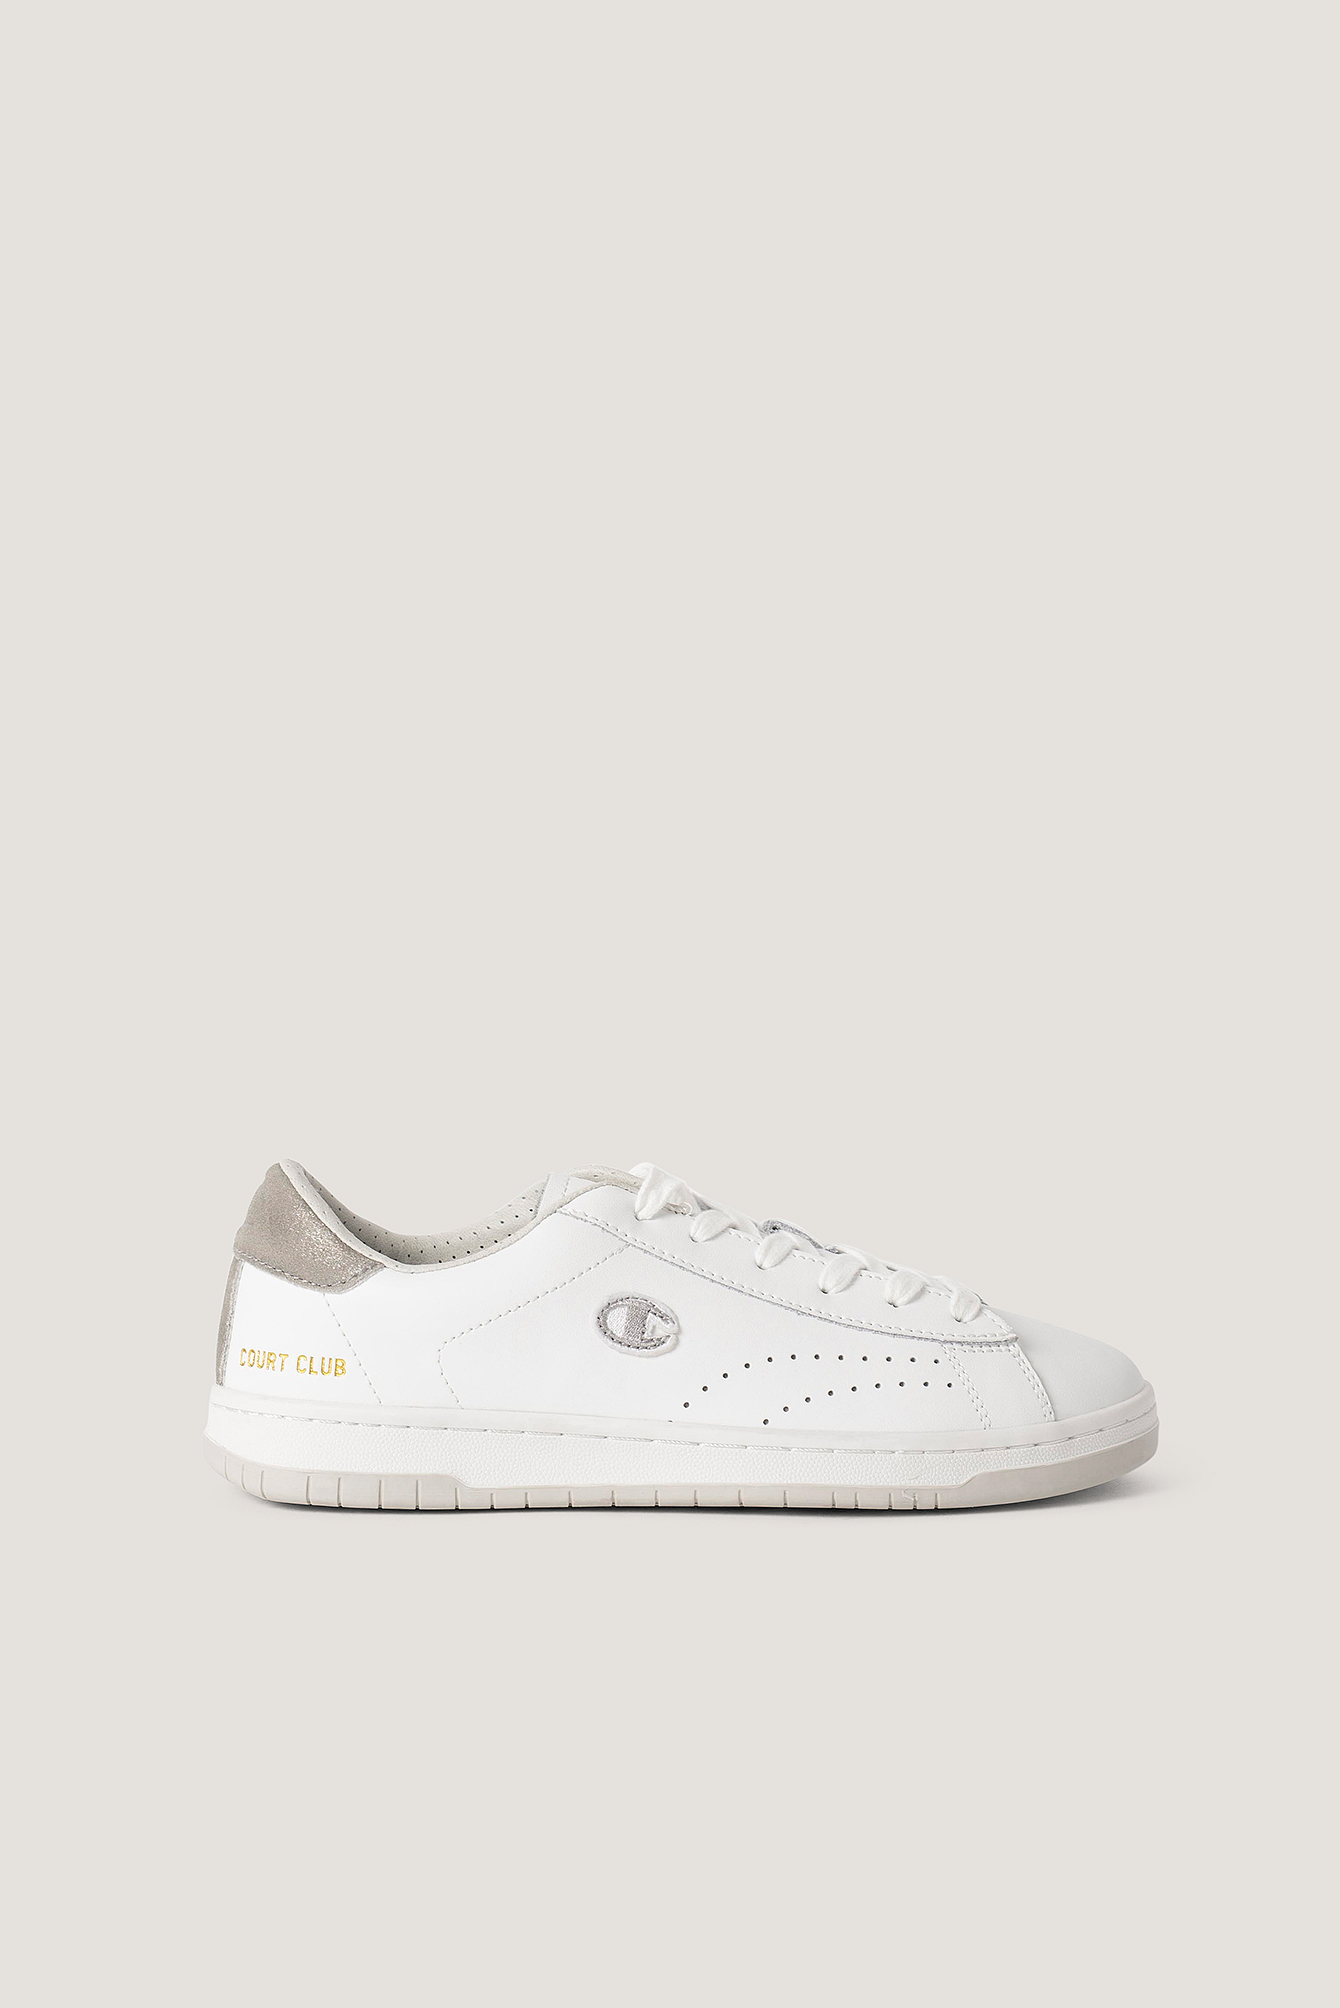 White/Silver Low Cut Sneakers Court Club